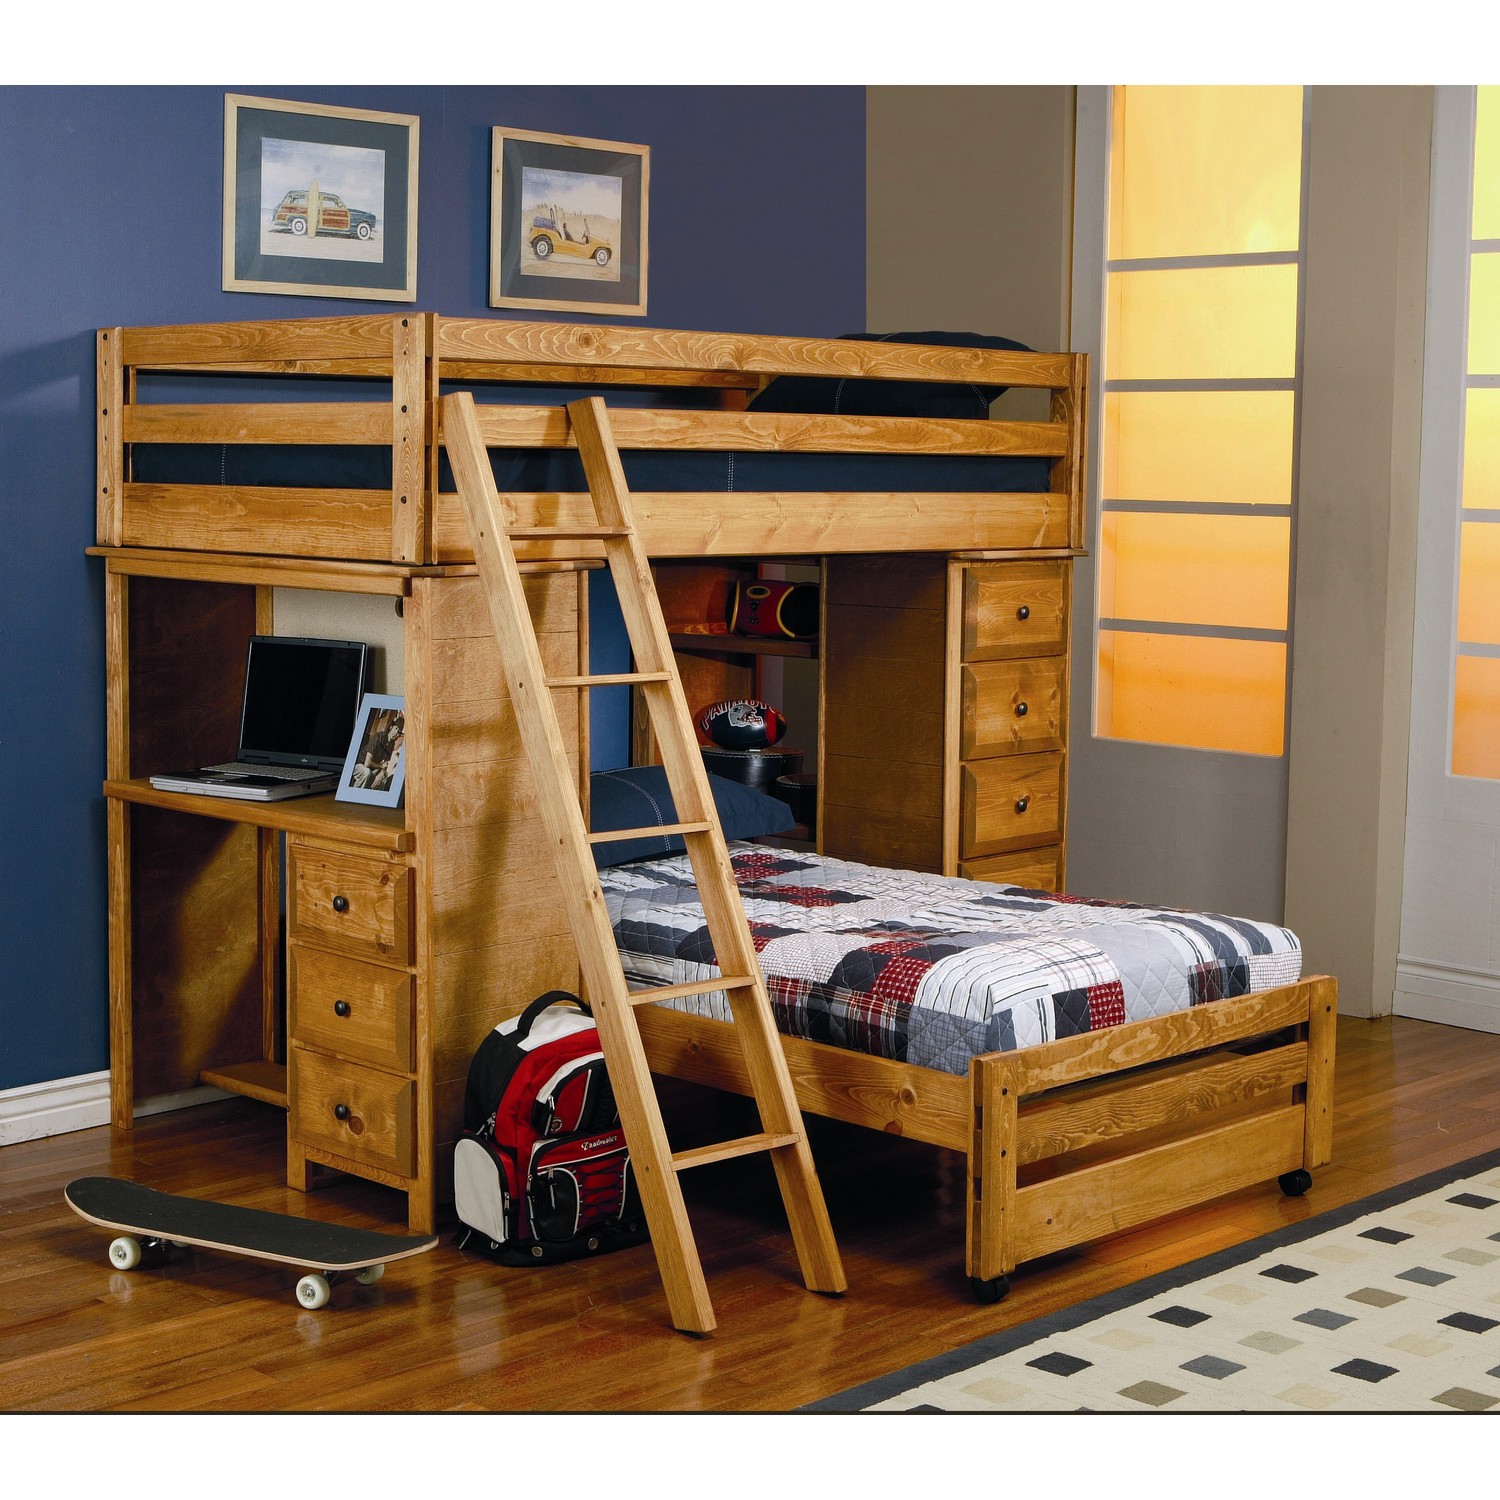 Bunk bed with desk for your kids homesfeed 5